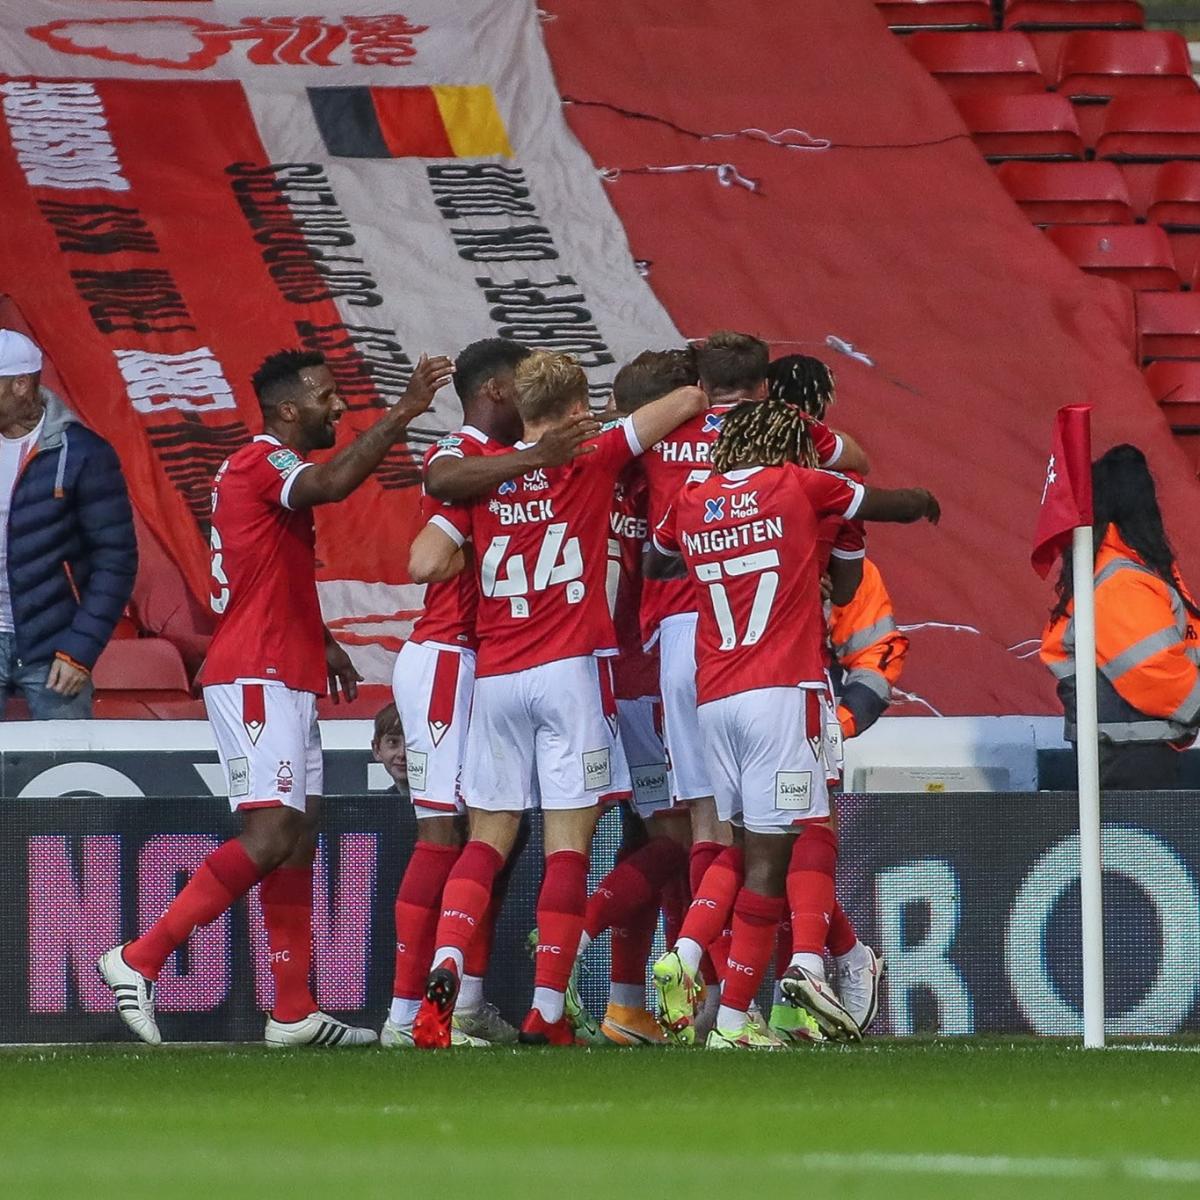 Nottingham Forest vs Wolves: Live Stream, Score Updates and How to